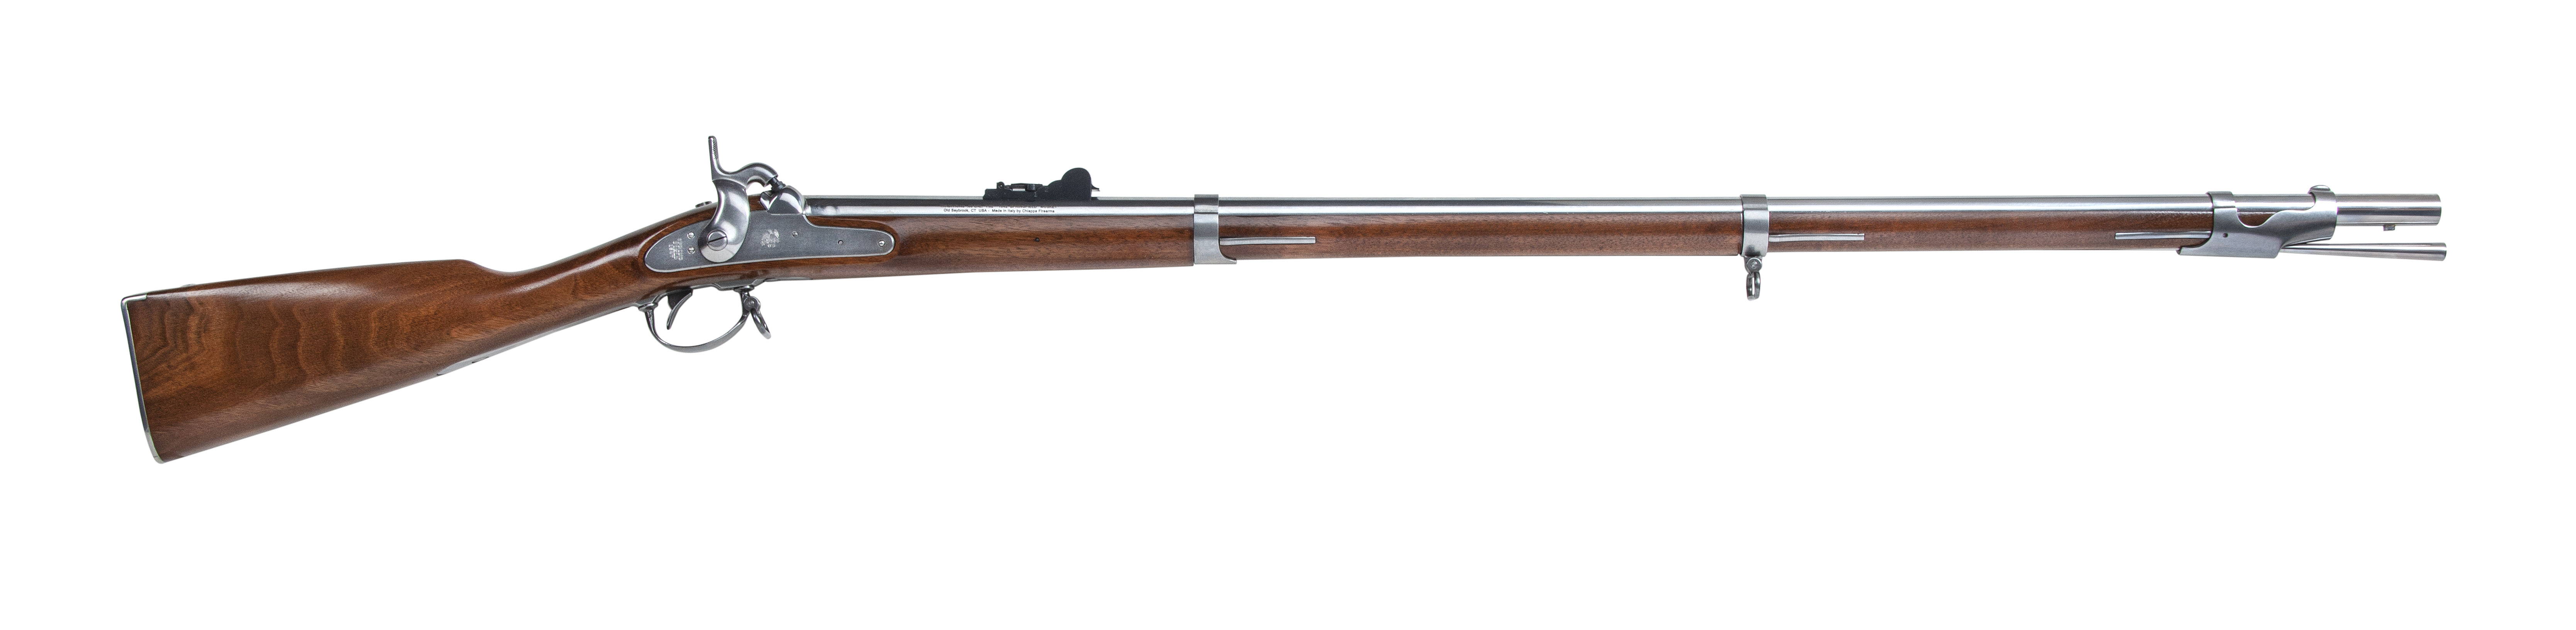 Traditions 1842 Springfield Musket